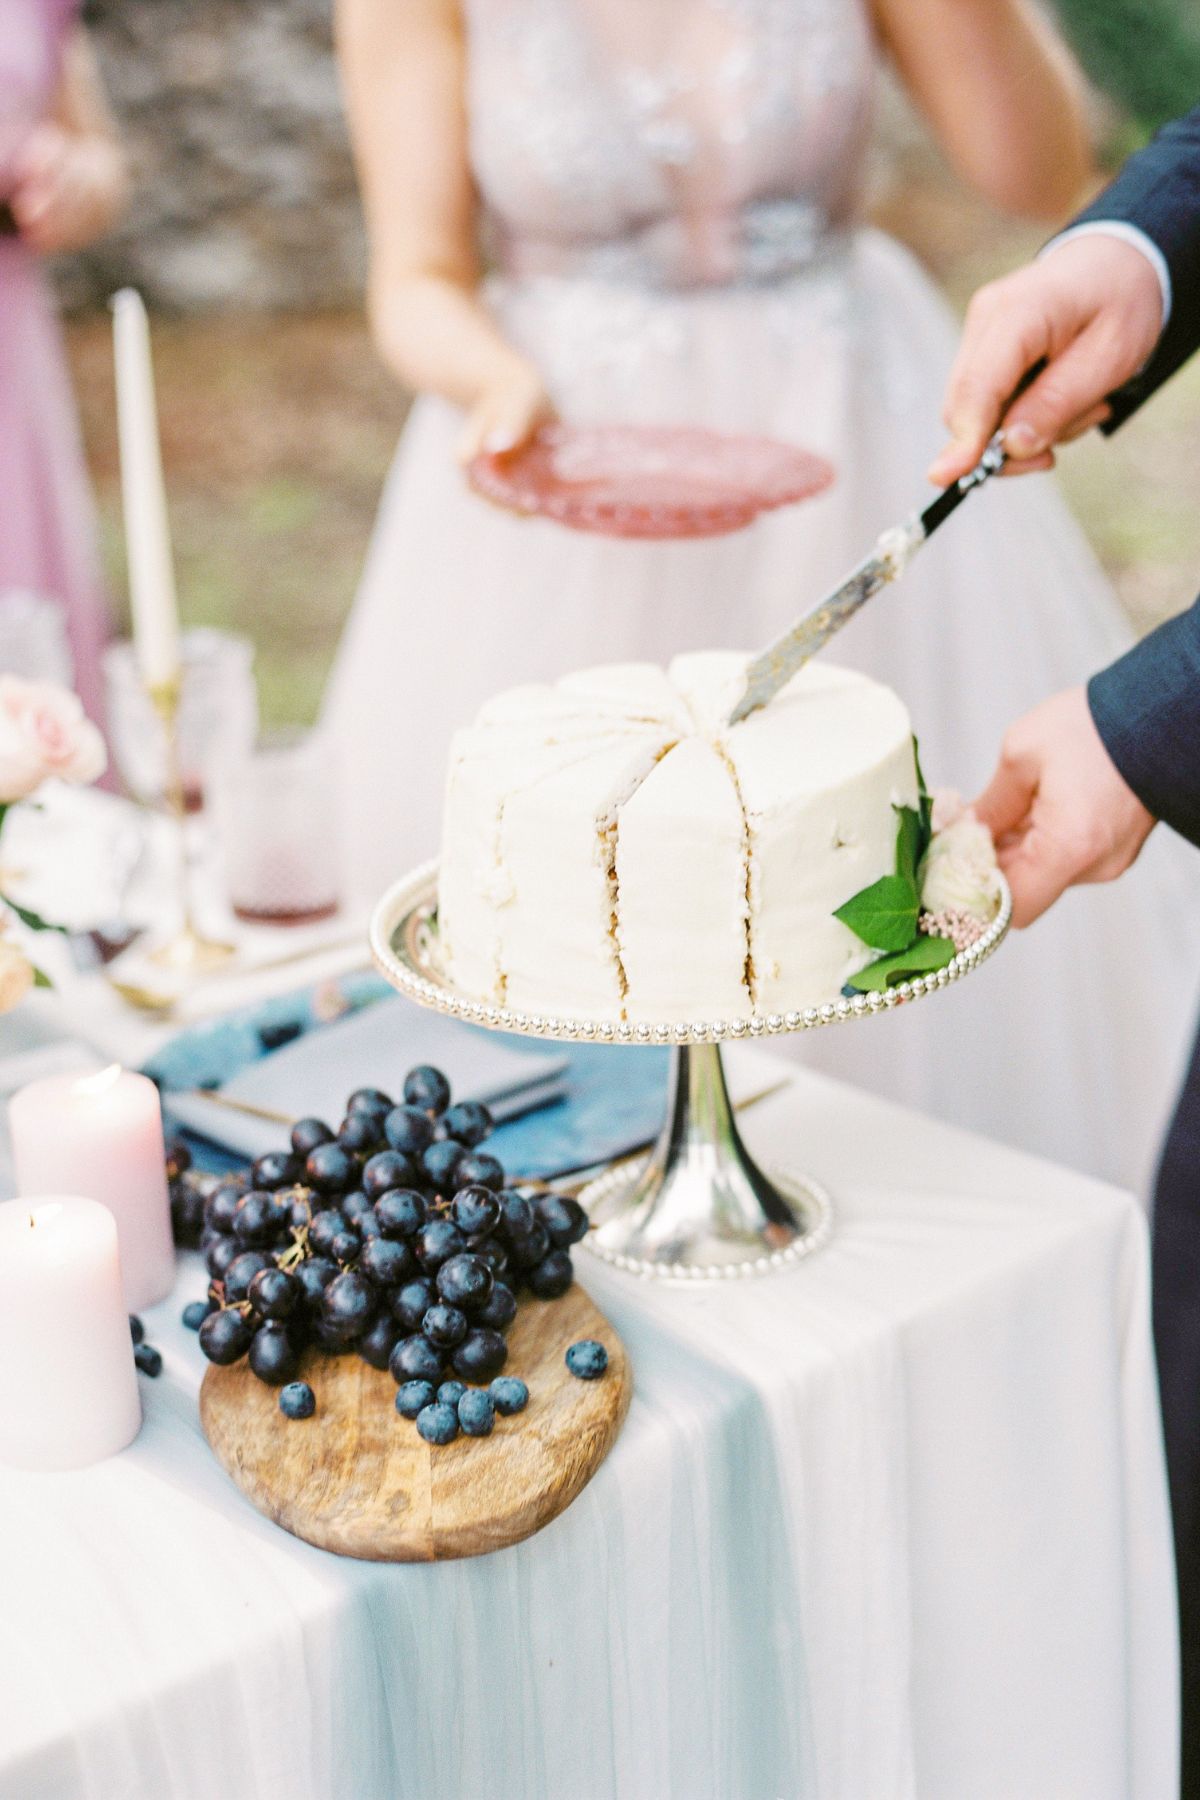 Ways To Save Money On Your Wedding: Cut Down Wedding Costs